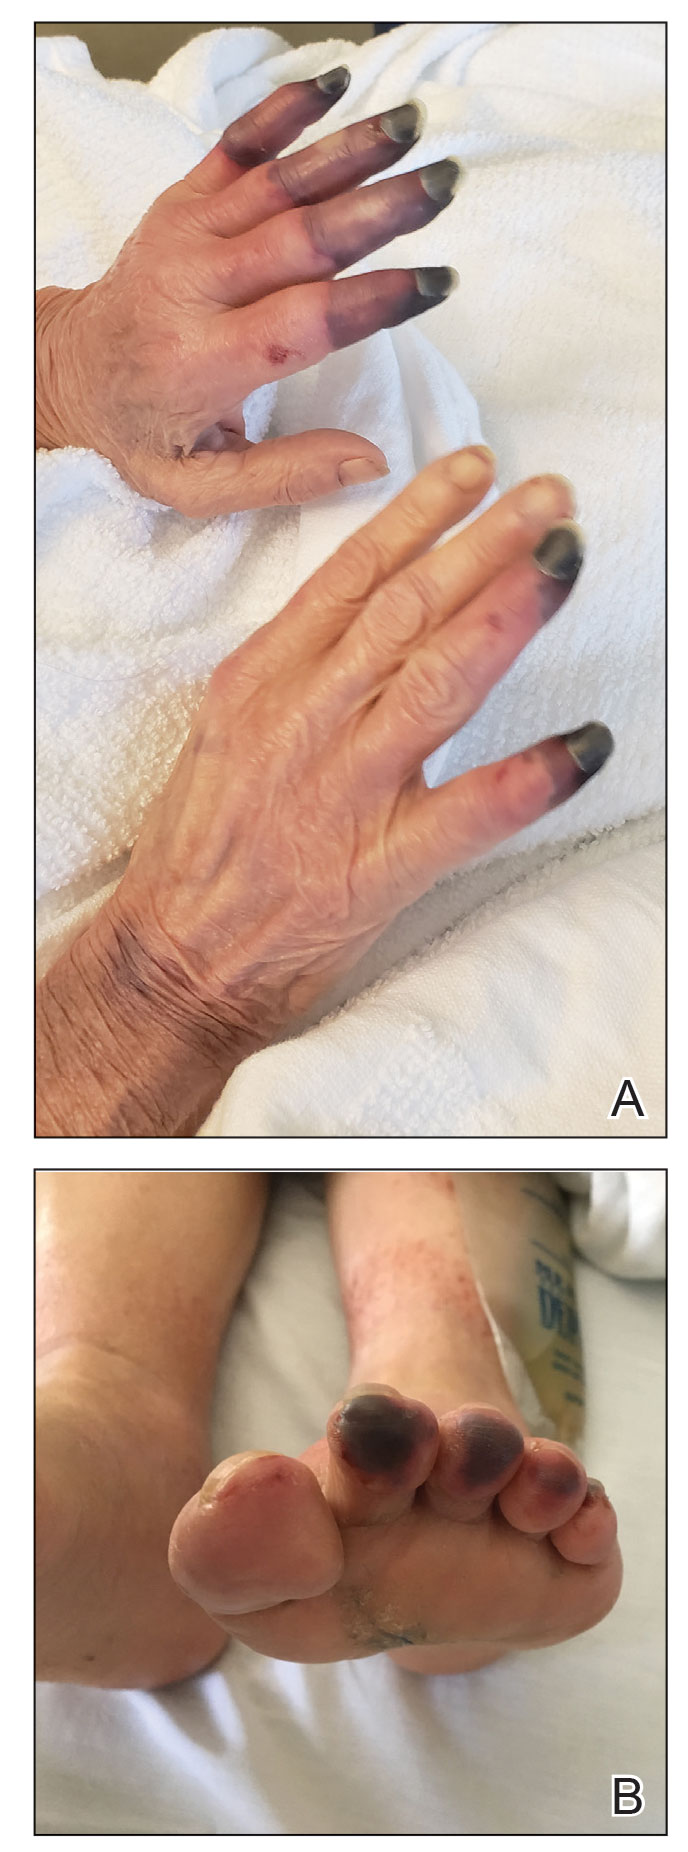 Acral necrosis after immune checkpoint inhibitor therapy. A, Purpura and necrosis were present on the fingers. B, Purpuric papules and necrosis were seen on the toe pads.